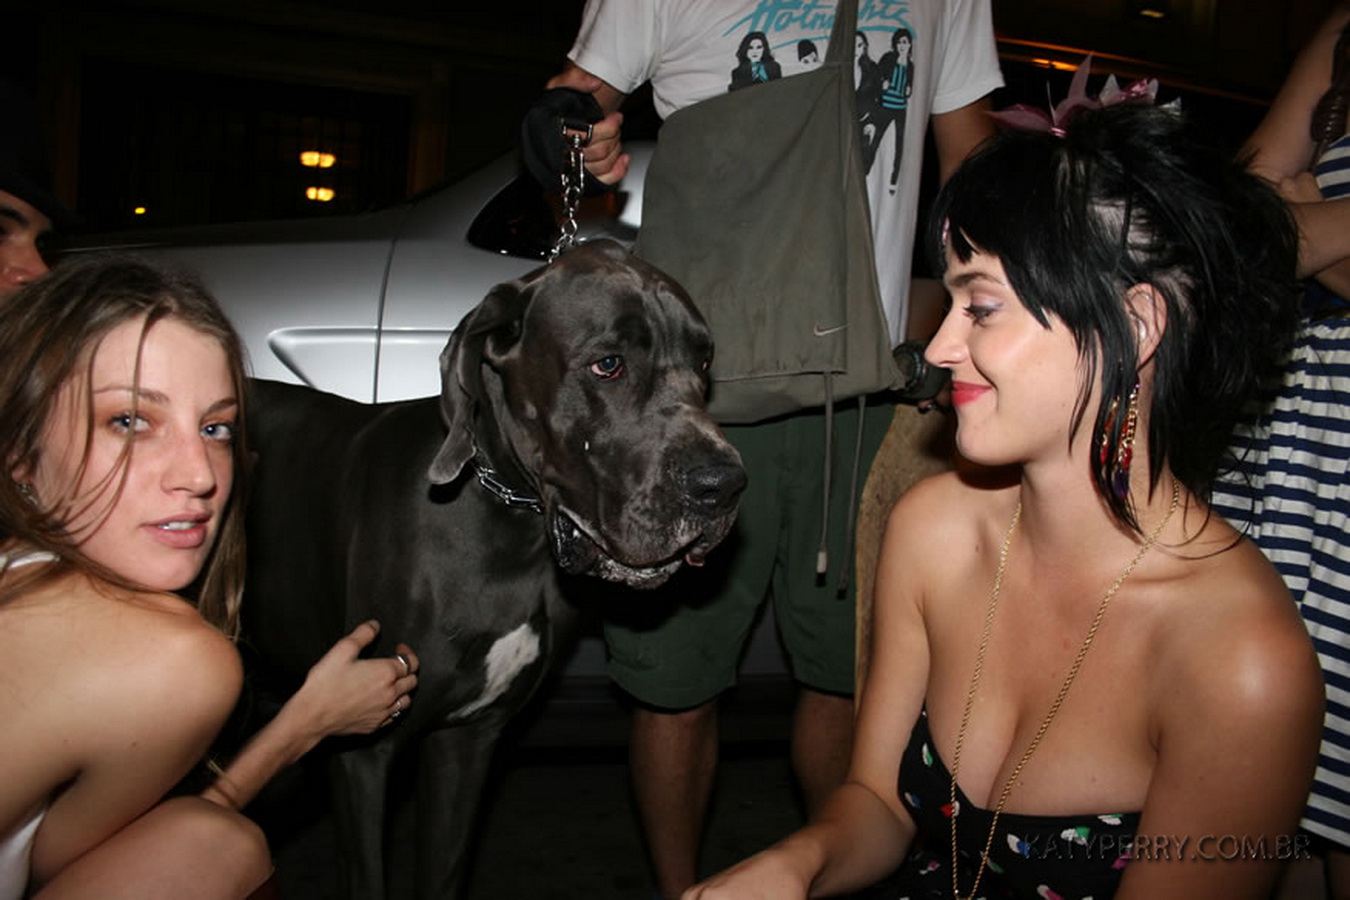 Katy_Perry_bobsslip_drunk_cleavage_downblouse_upskirt_nipslip_at_her_birthday_2007_party_99x_HQ_86.jpg